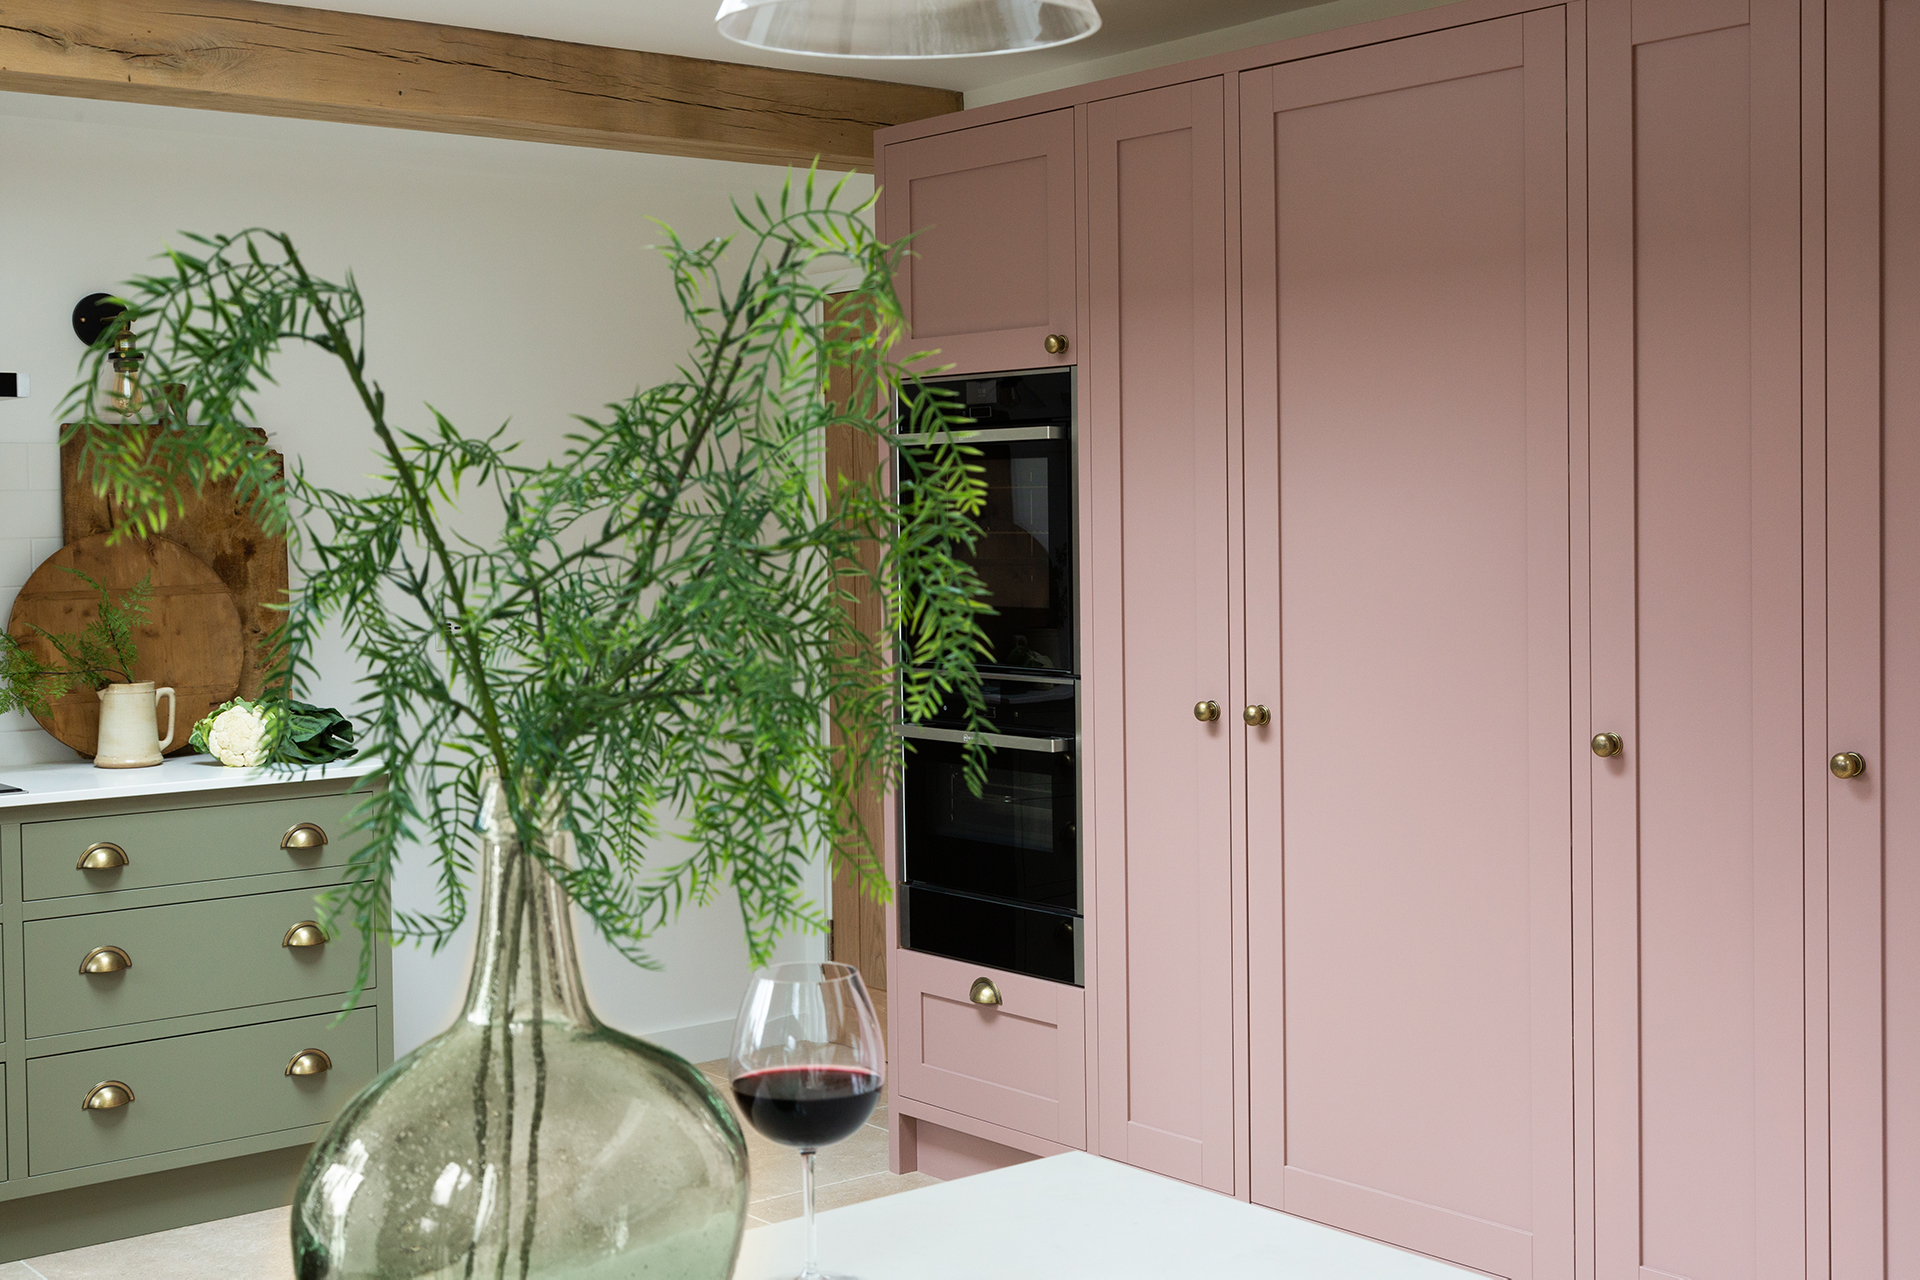 In frame pink and green kitchen